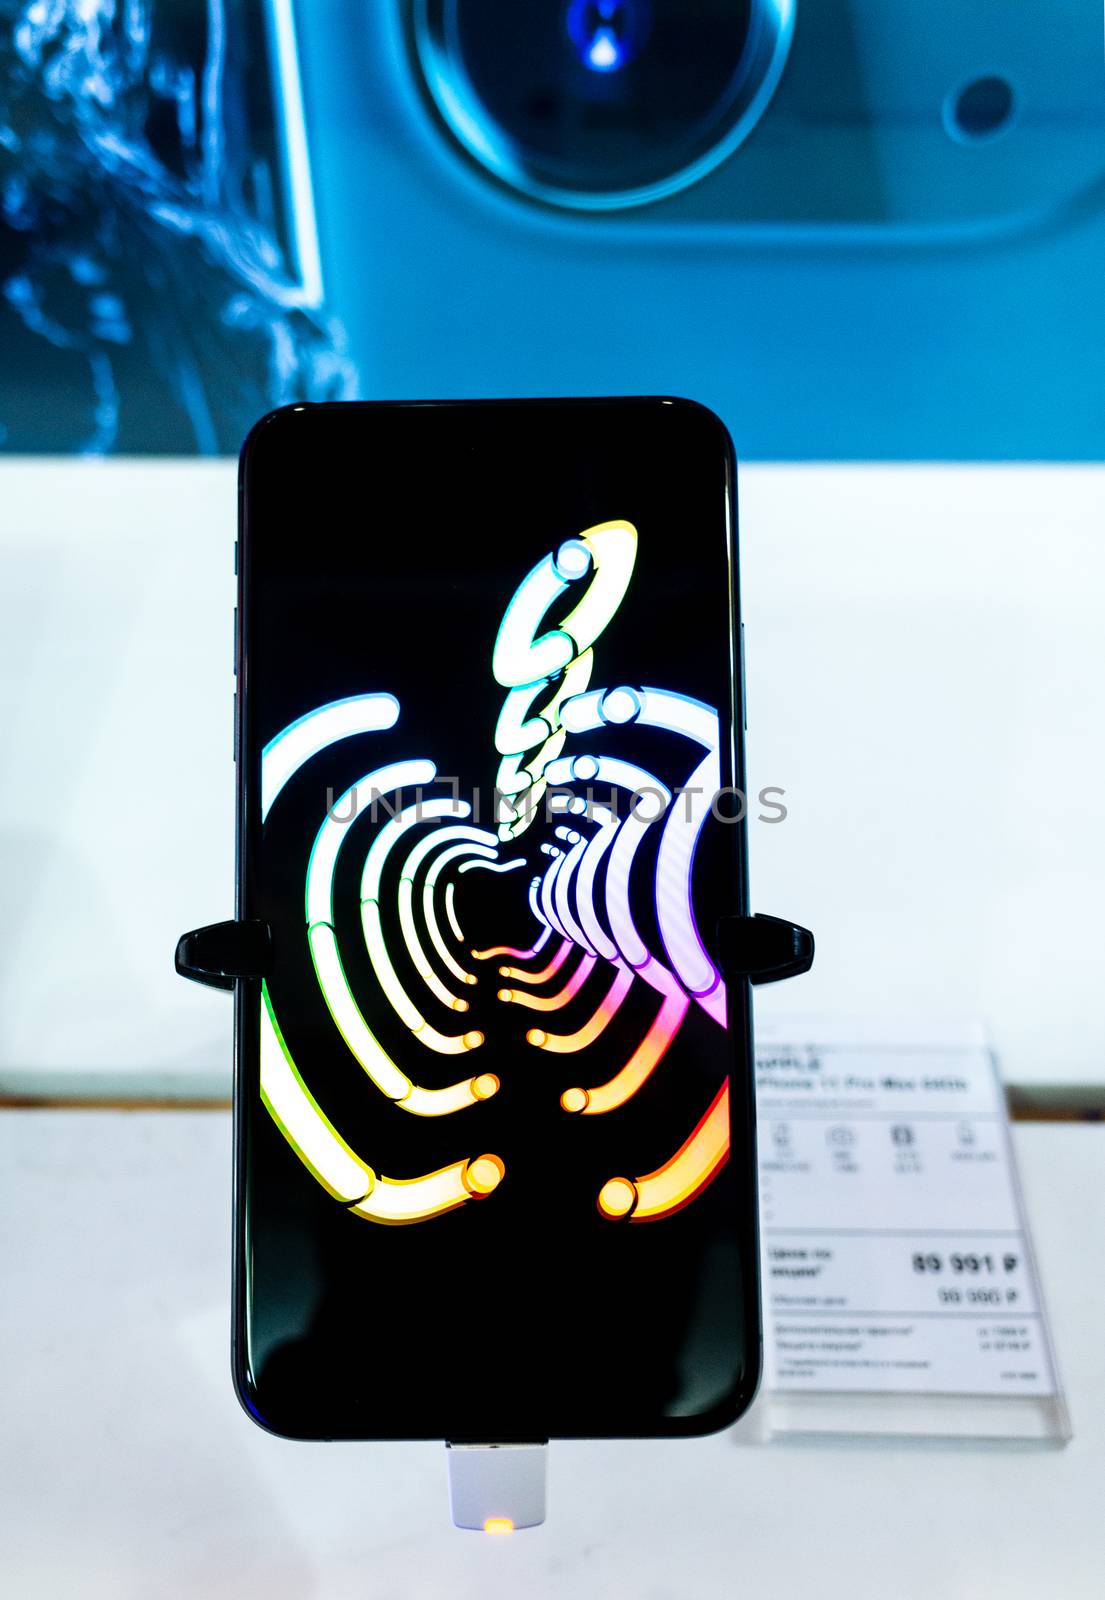 September 20 2019 Moscow, Russia. New phone from Apple Iphone 11 pro MAX on the shop window